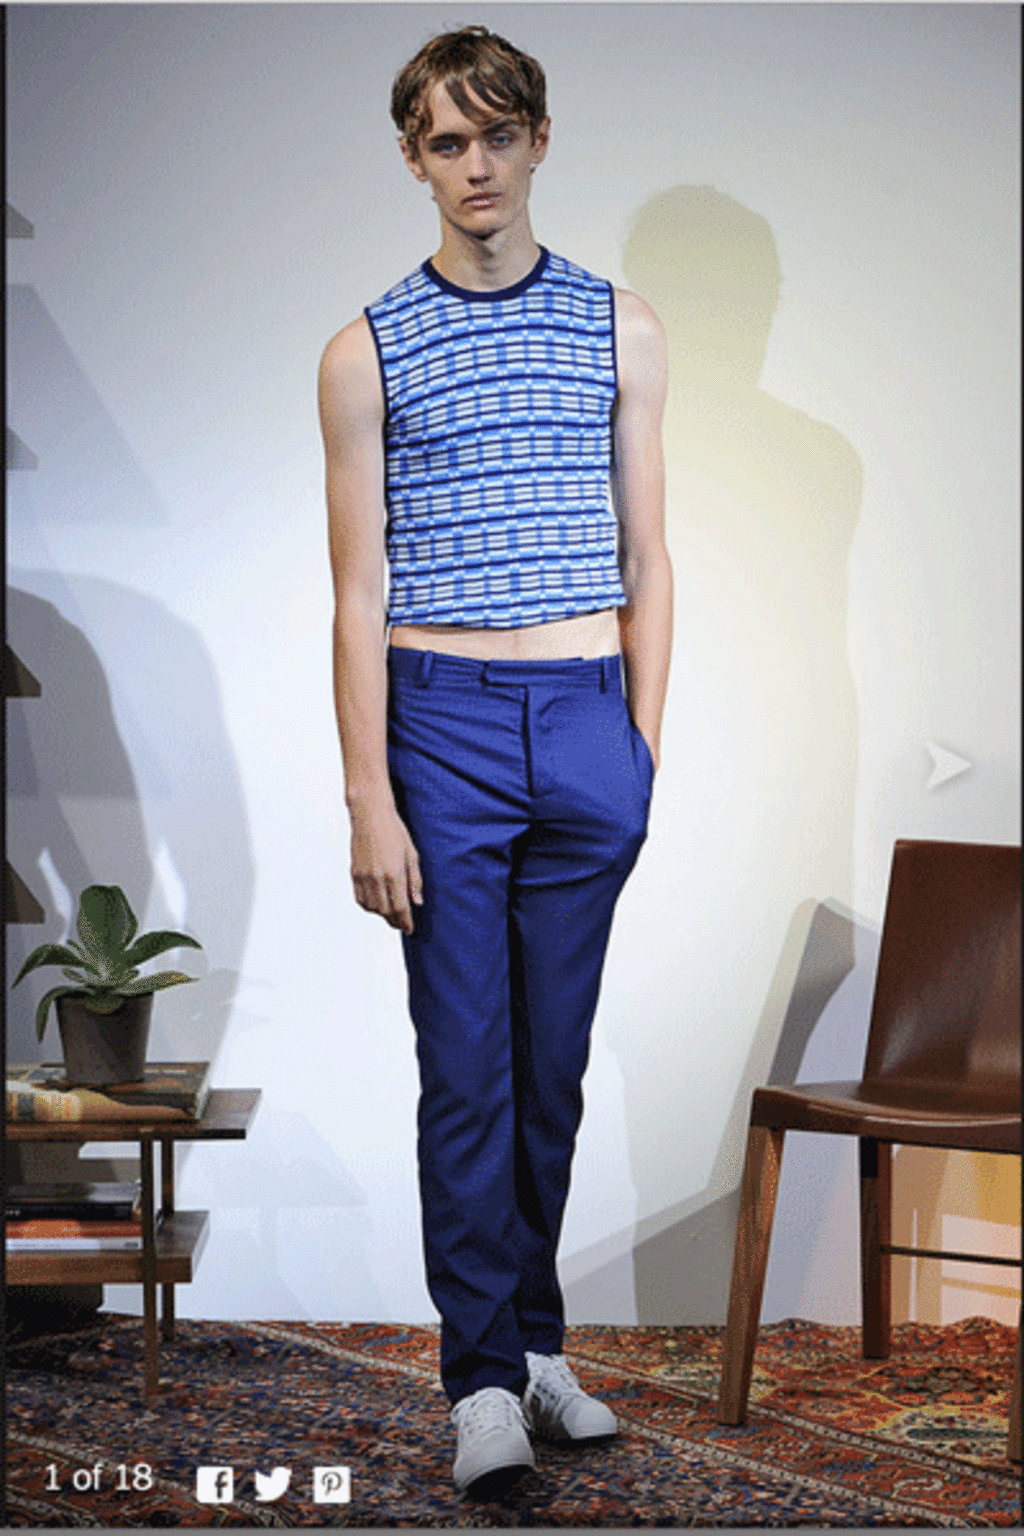 Orley SS 16 (courtesy of nytimes.com)